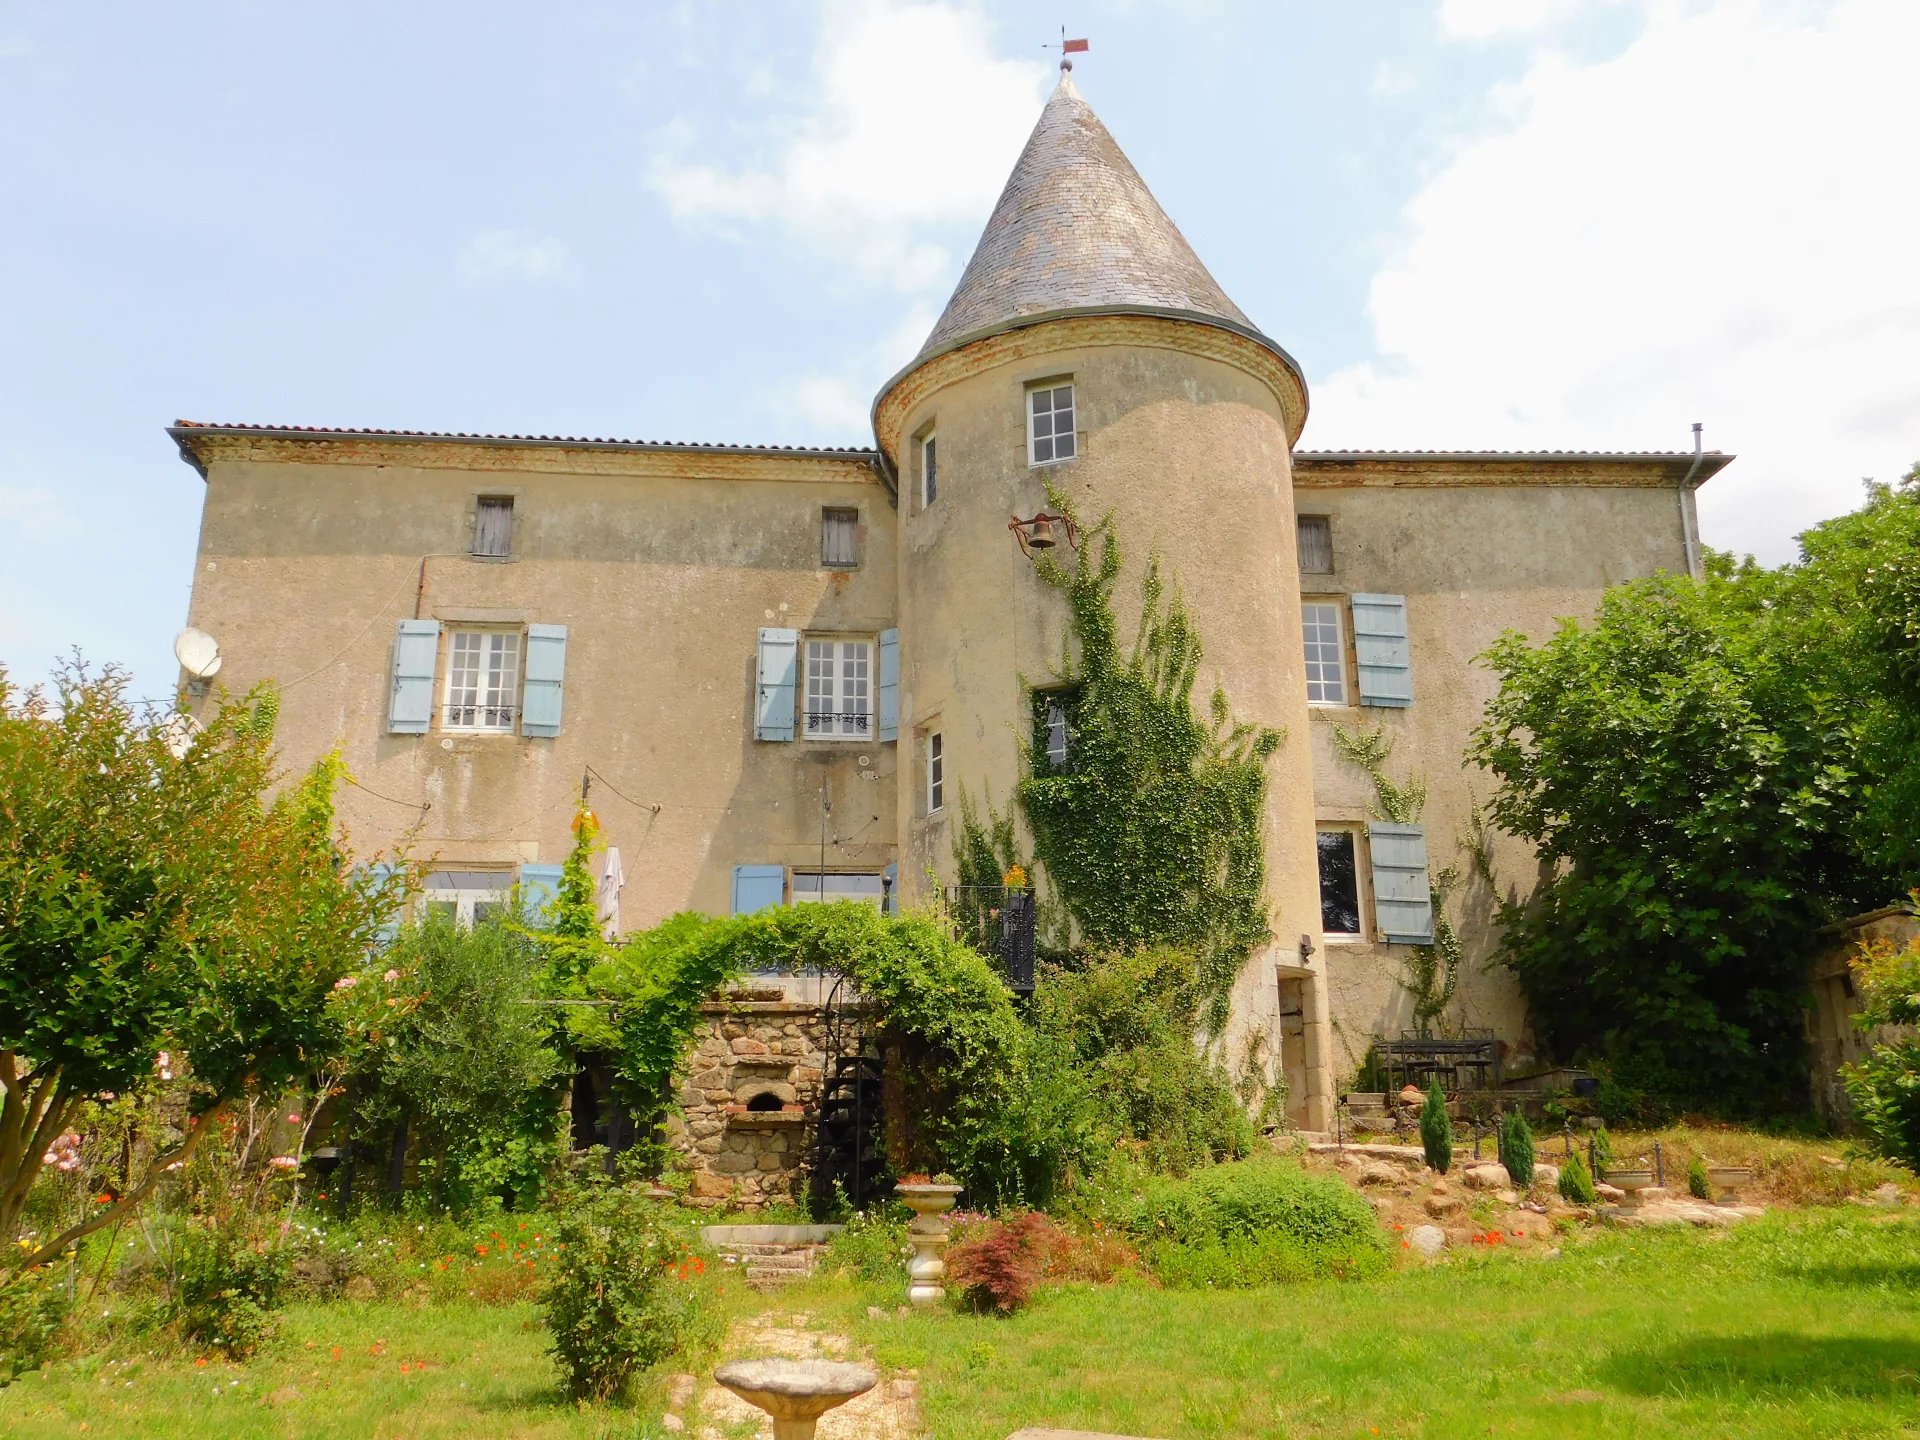 Chateau dating from 13th century with beautiful countryside view